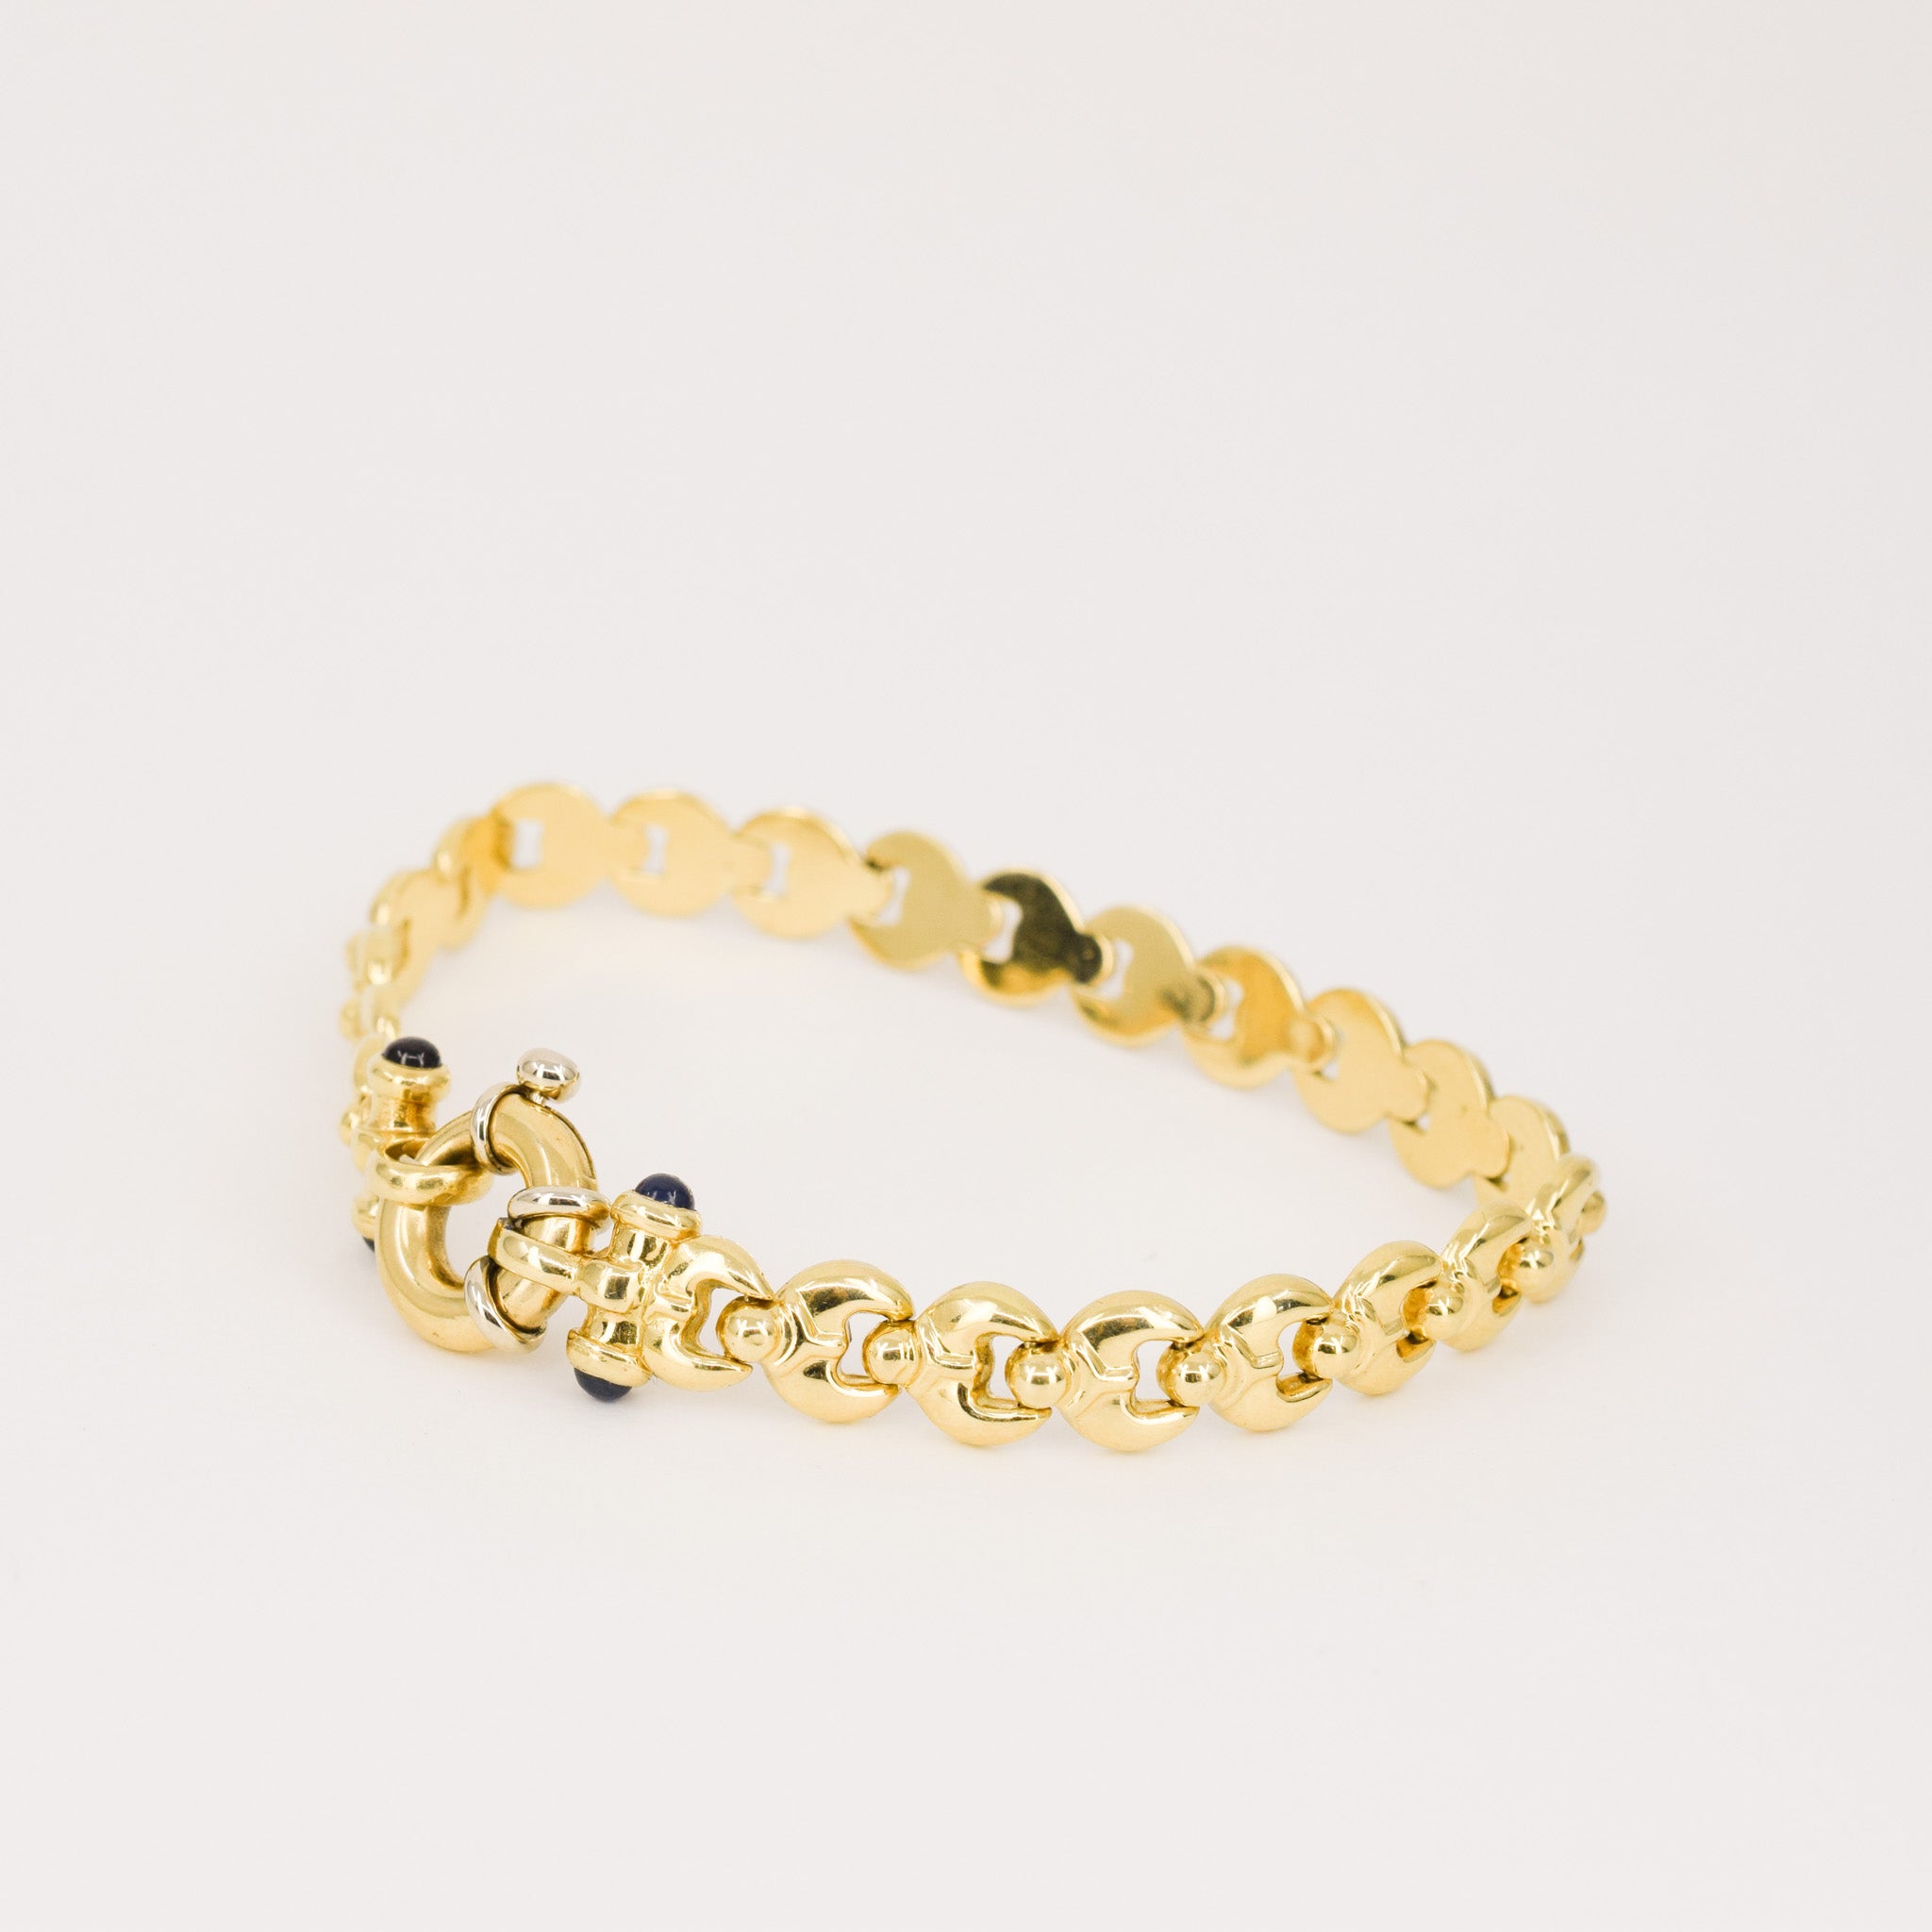 7" Sapphire and Gold Puffy Link Bracelet